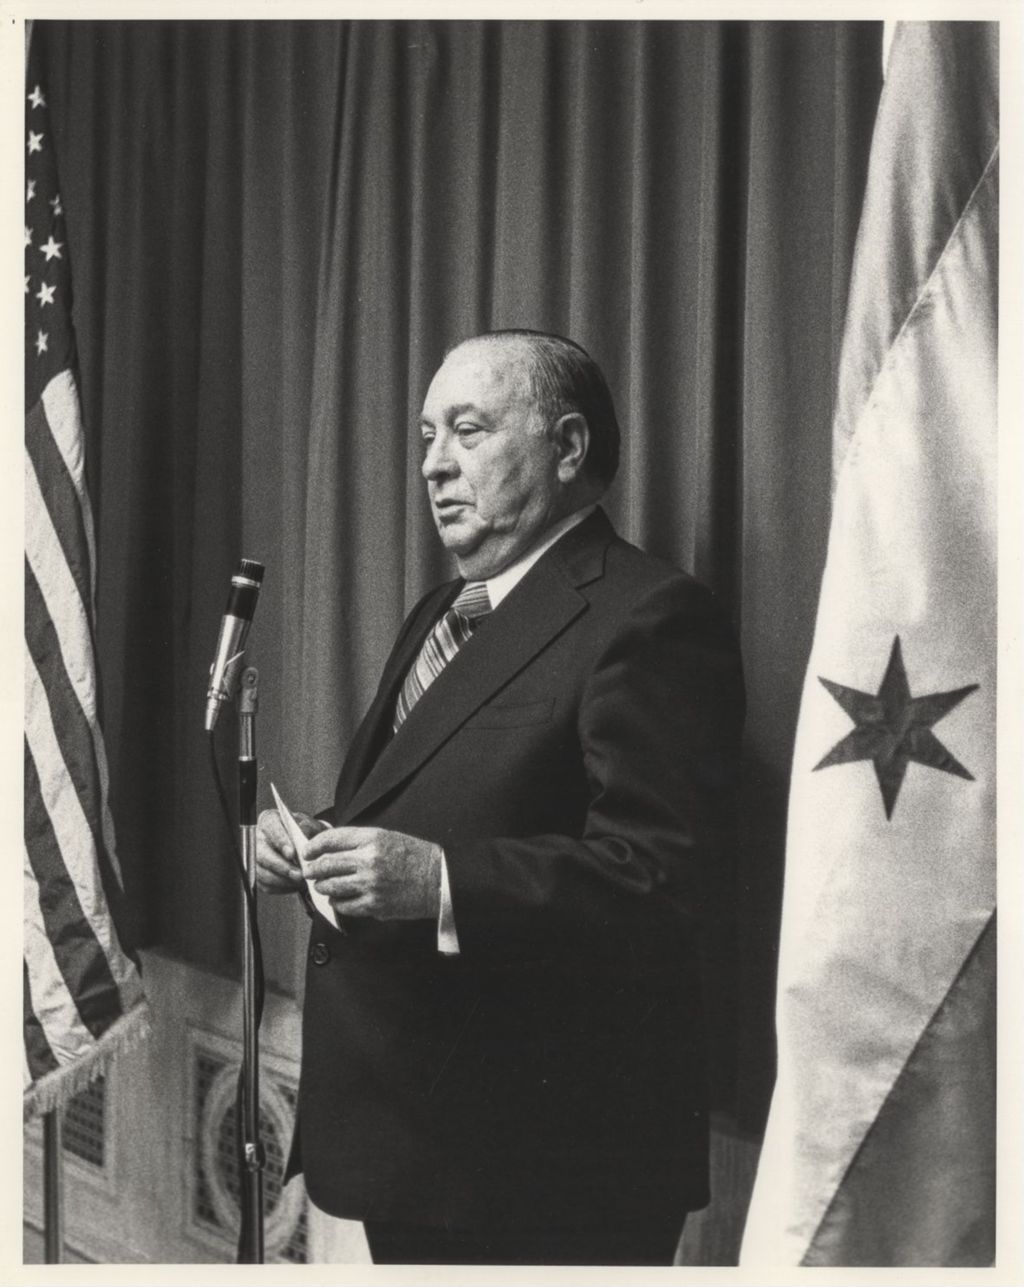 Richard J. Daley speaking at a microphone